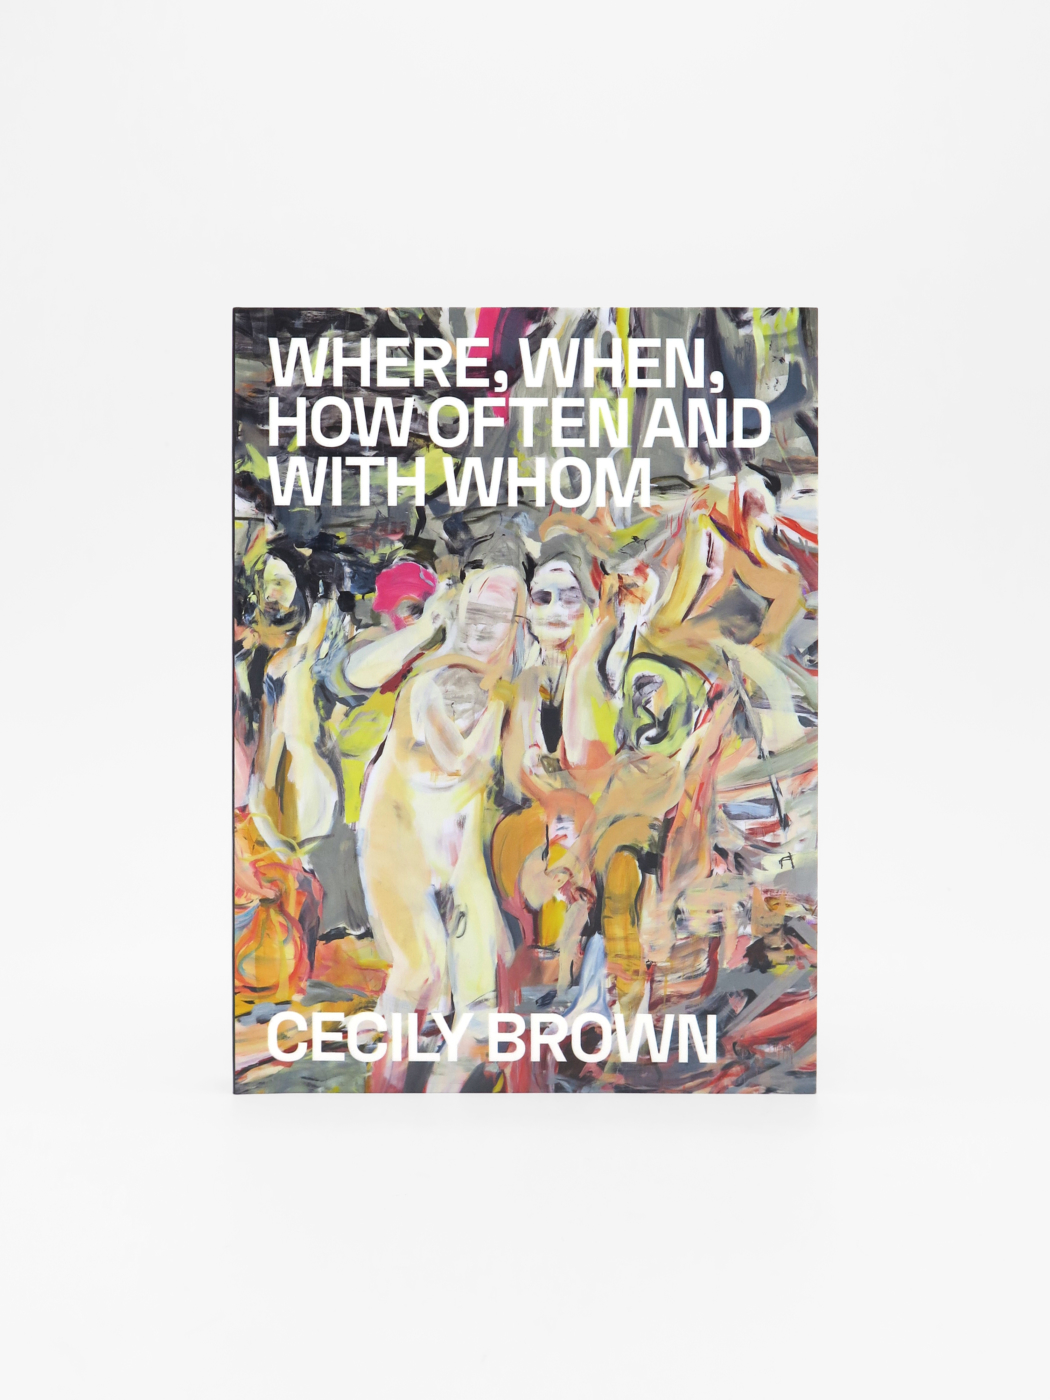 Cecily Brown, Where, When, How Often and with Whom